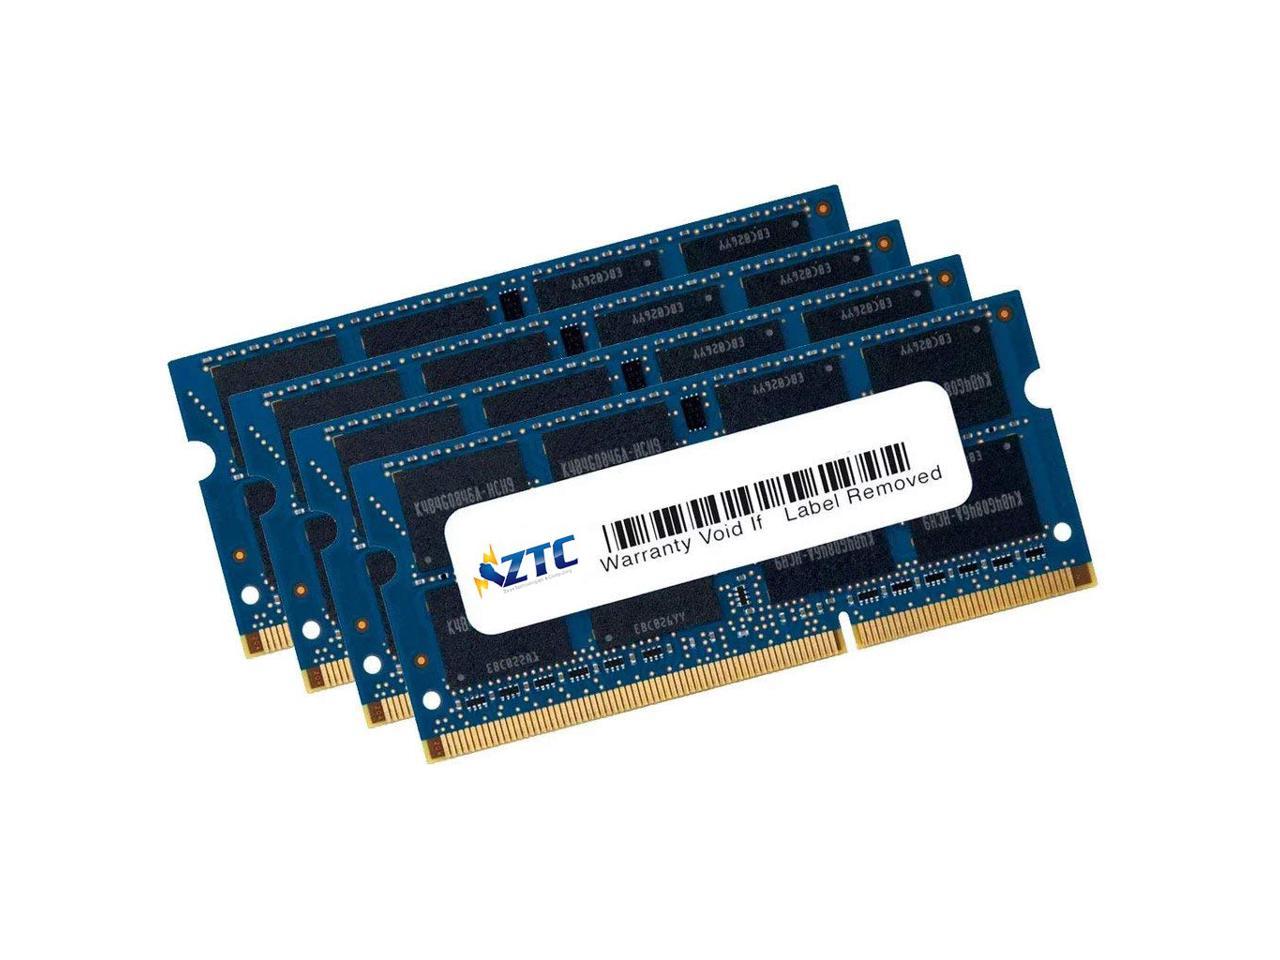 ZTC 64GB (4X 16GB) 2400MHz DDR4 PC4-19200 SO-DIMM 260Pin CL17 Memory Upgrade Kit. Memory Upgrade kit for 27" iMac w/Retina 5K (Mid 2017), and PCs That utilize PC4-19200